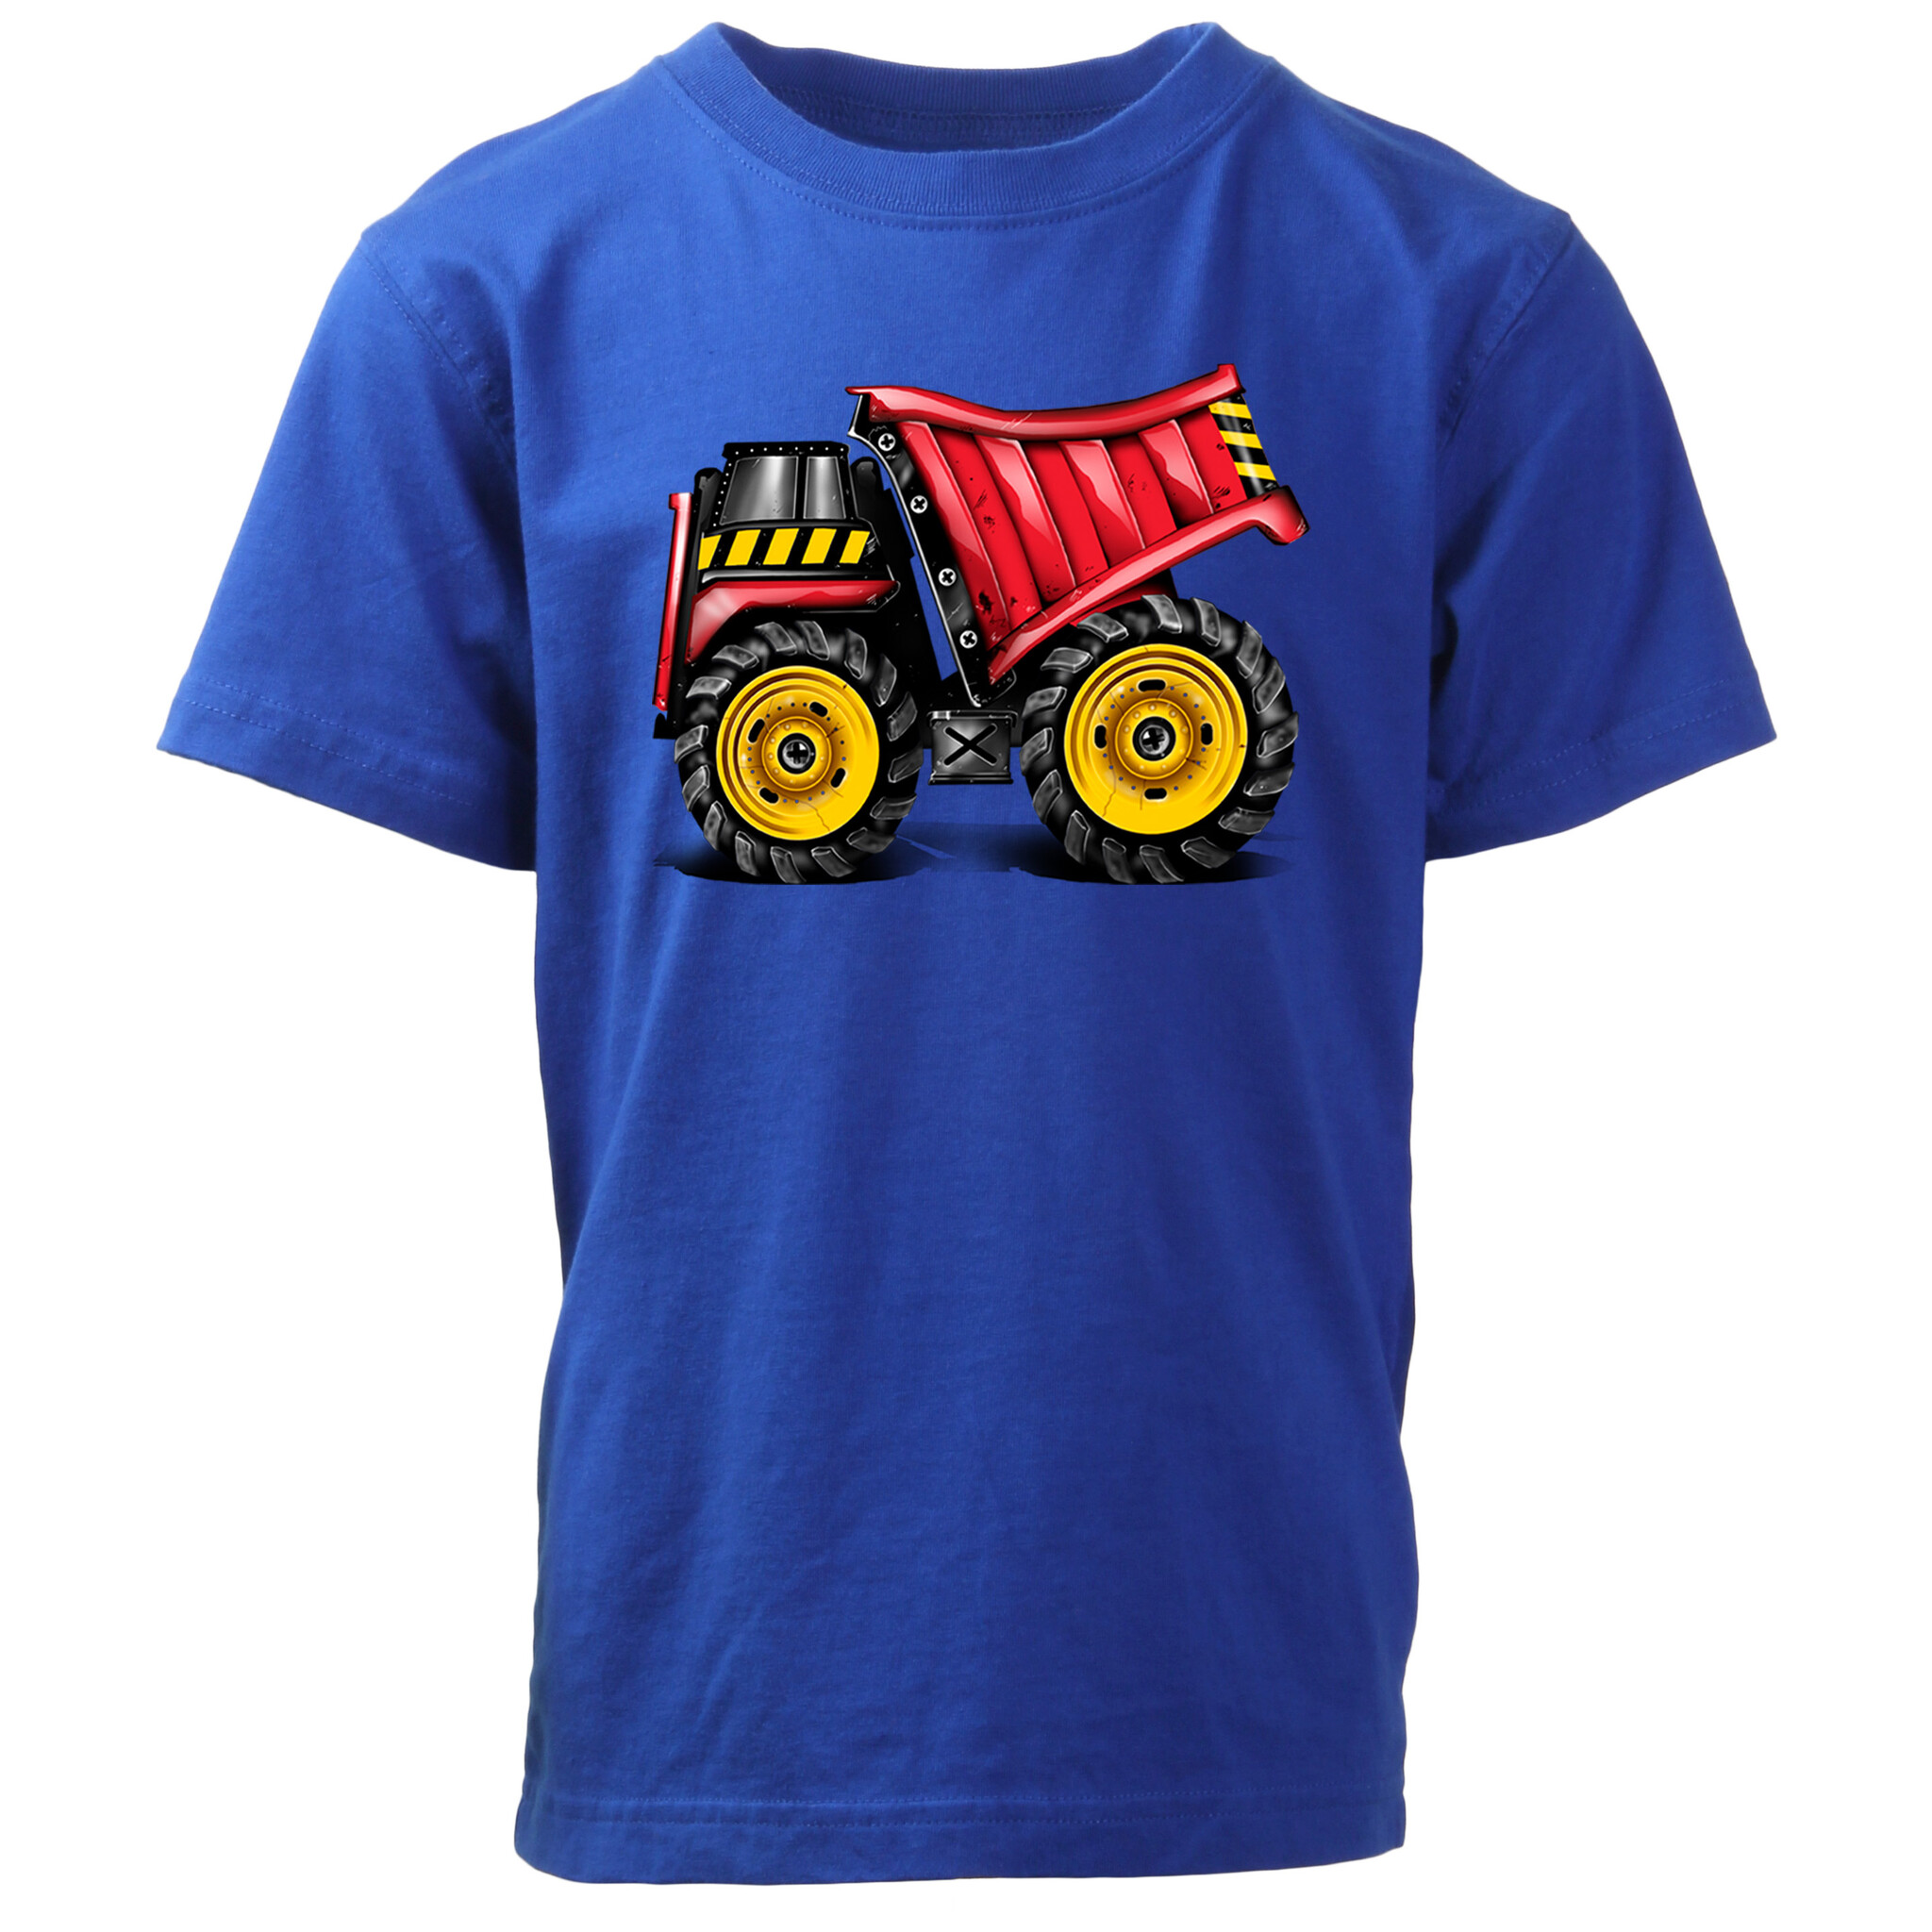 Wes And Willy Dump Truck SS Tee Blue Moon Blend